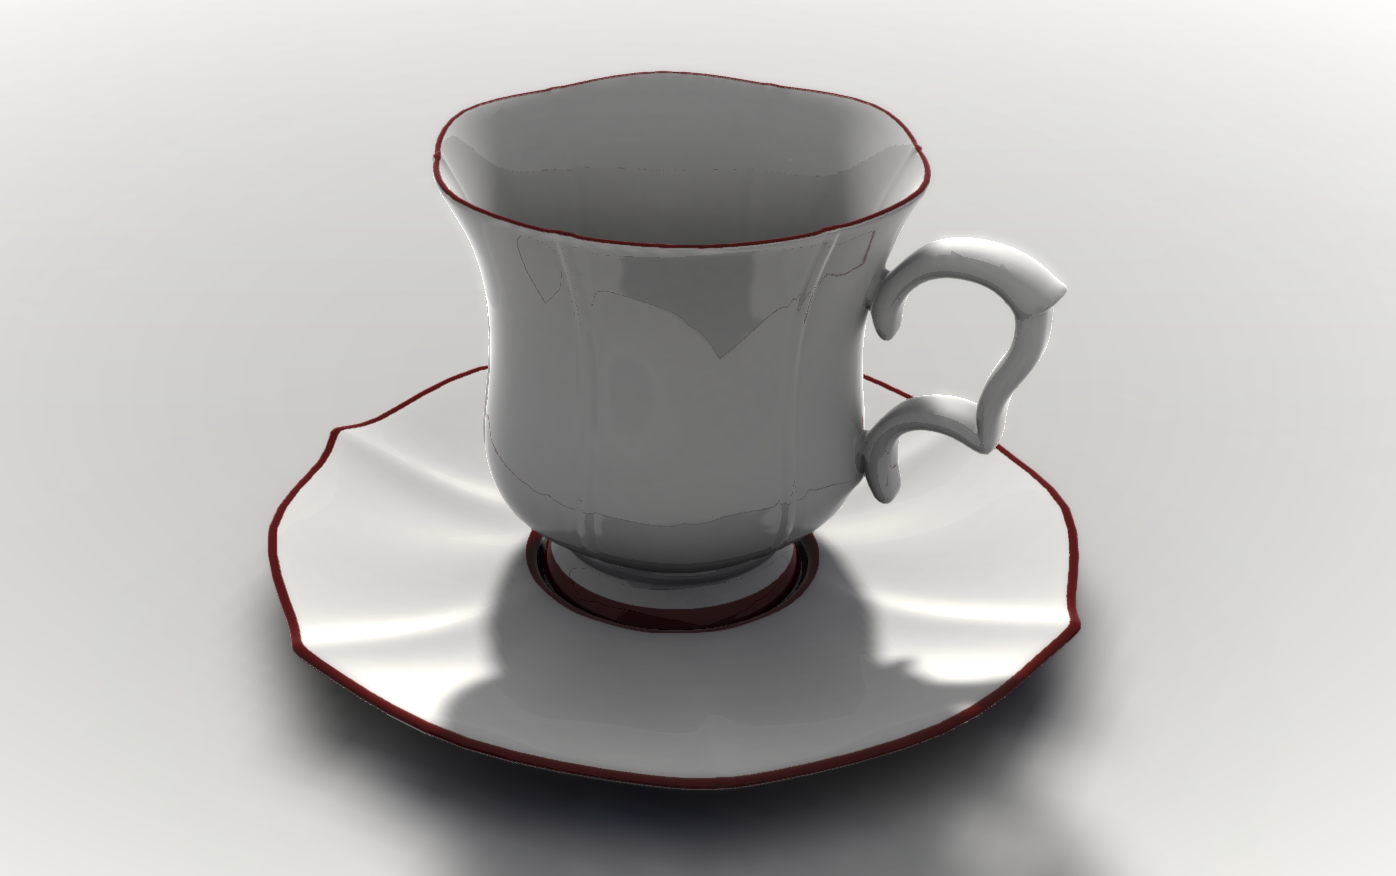 Interactive prototype of a porcelain cup